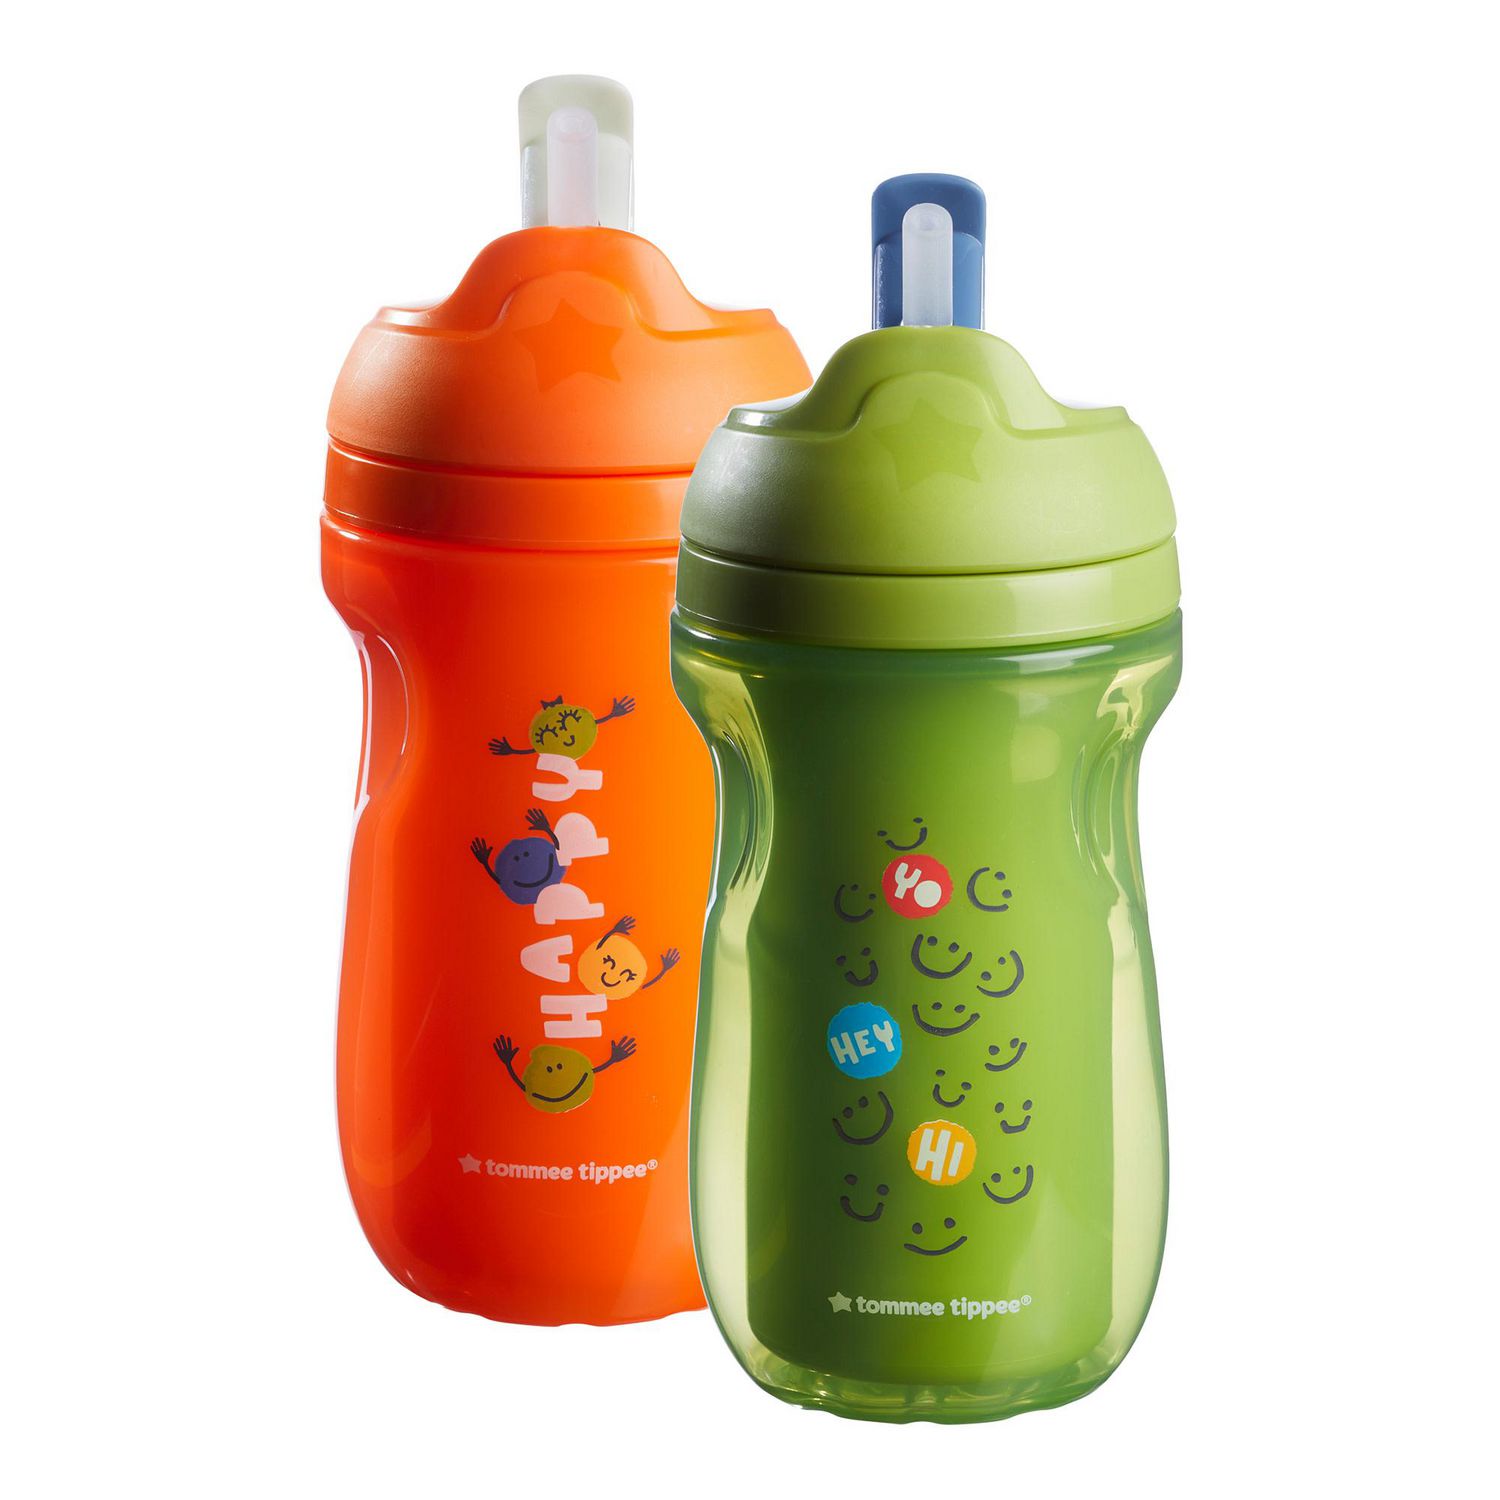 Tommee Tippee Insulated Straw Cup 12M+ –